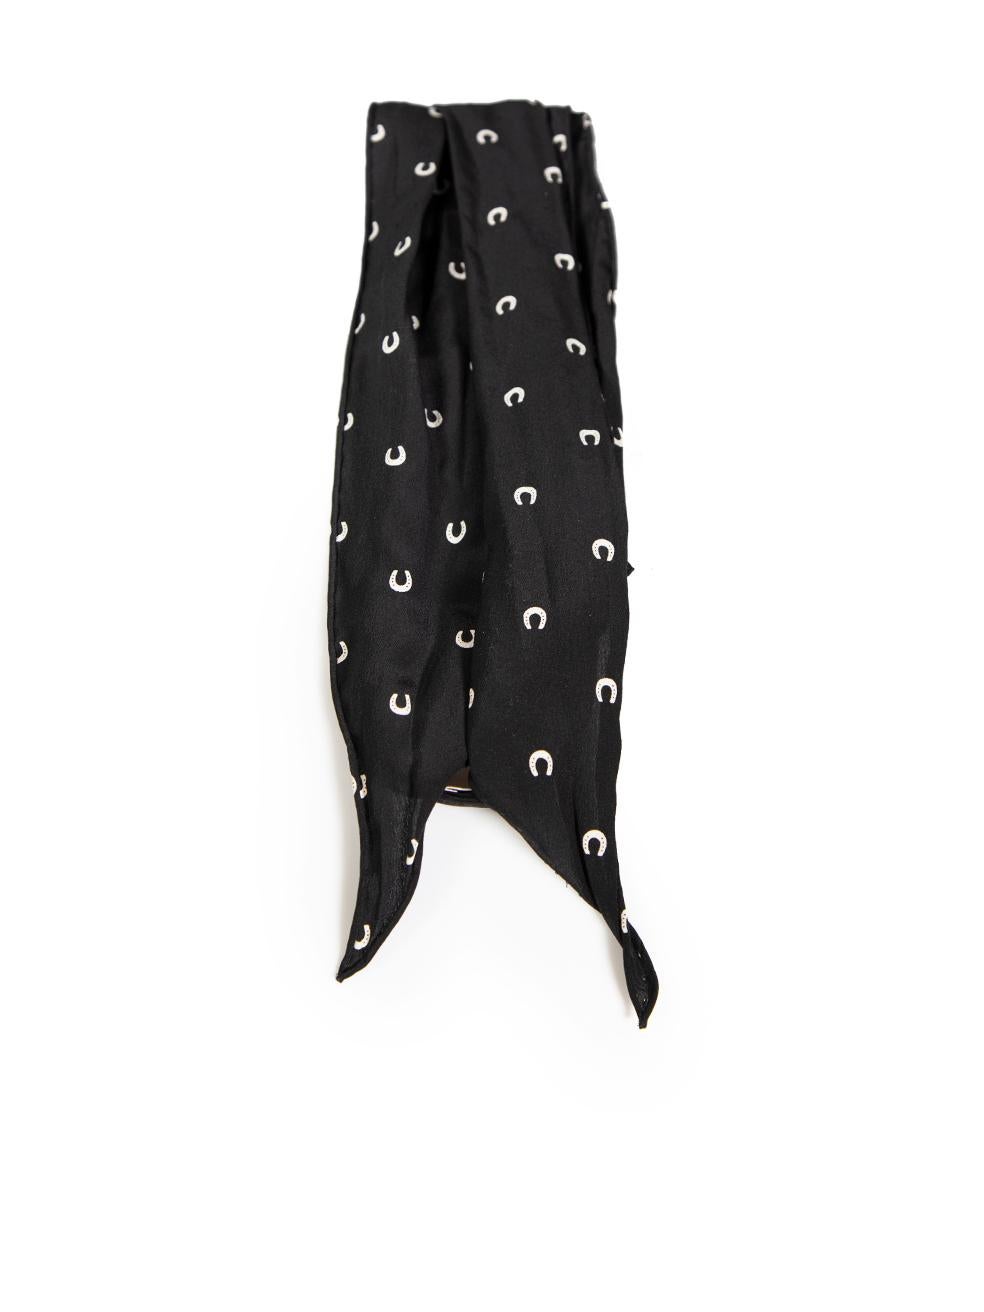 Saint Laurent Black Horse Shoe Print Skinny Scarf In Excellent Condition For Sale In London, GB